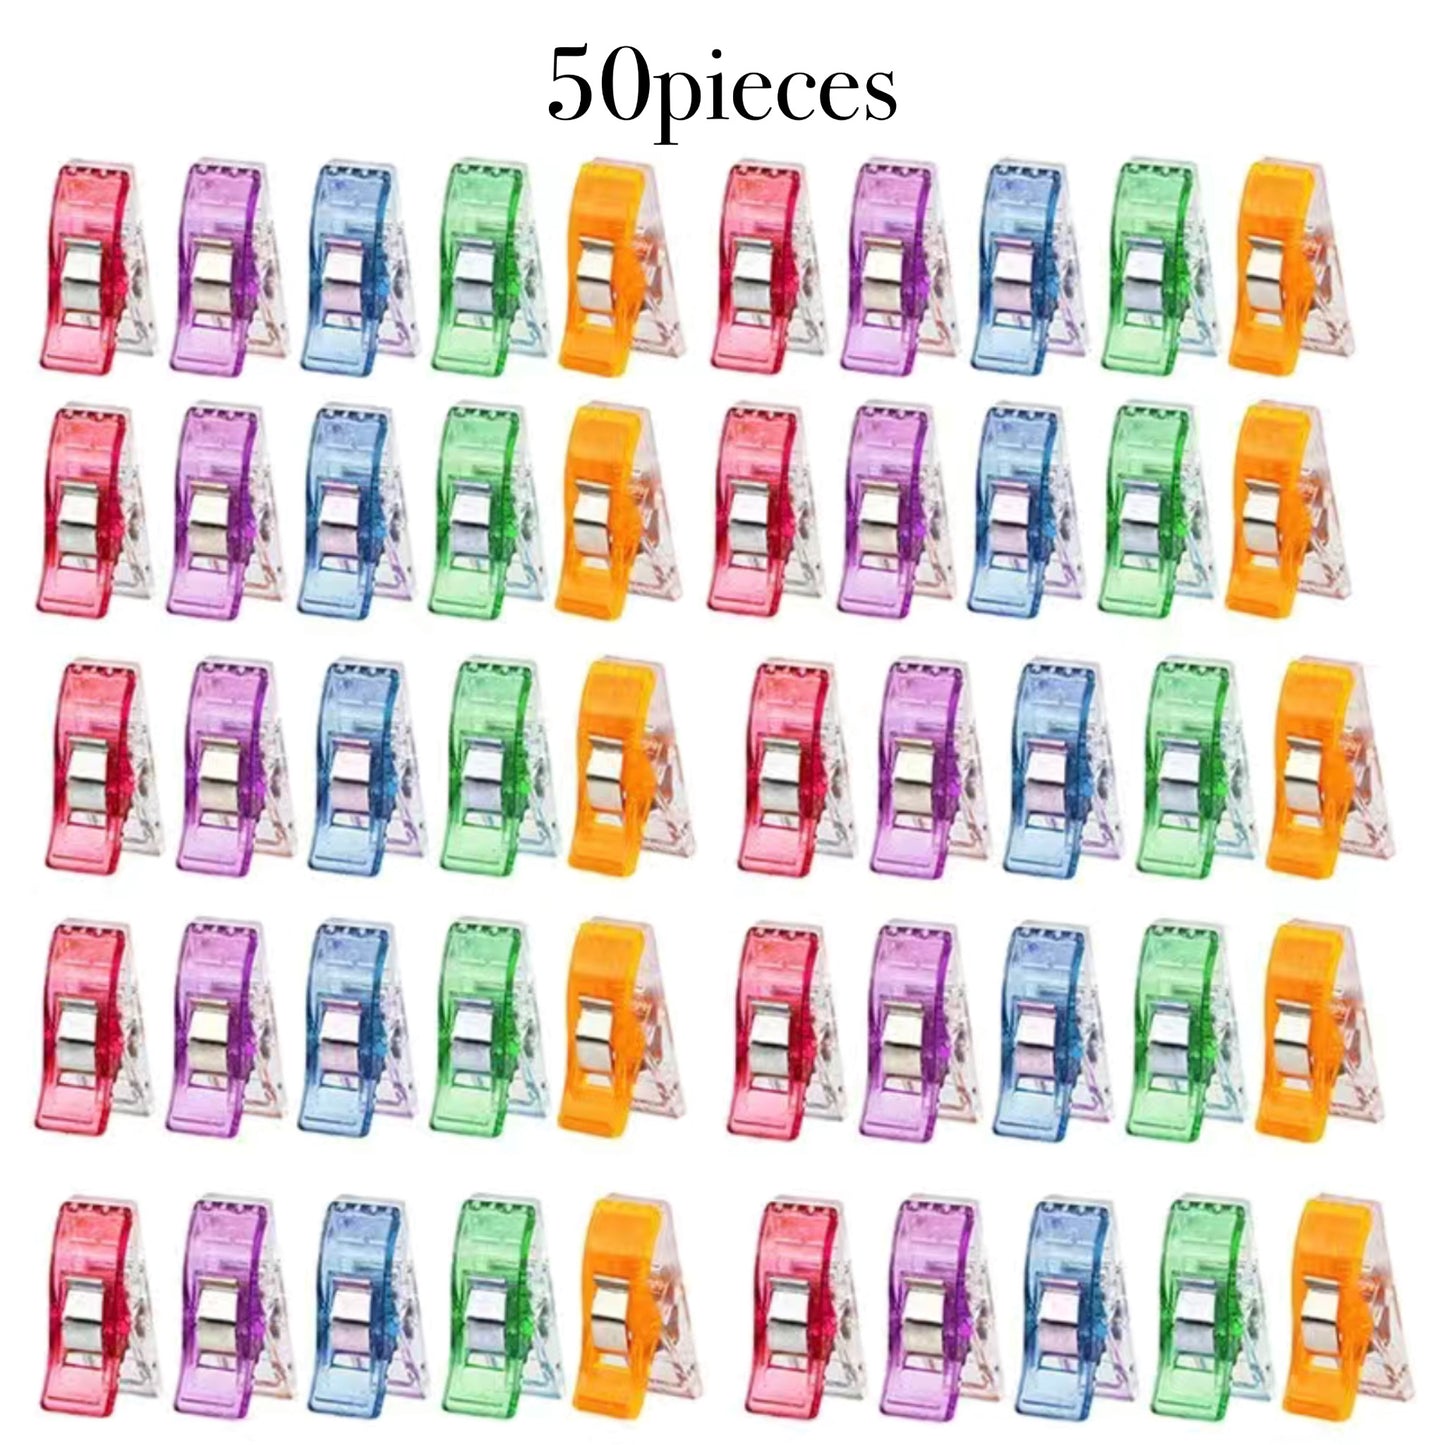 50pcs Sewing Colorful Clips ,Multipurpose Plastic Craft Safety Clothing Clips, Color Binding Clips